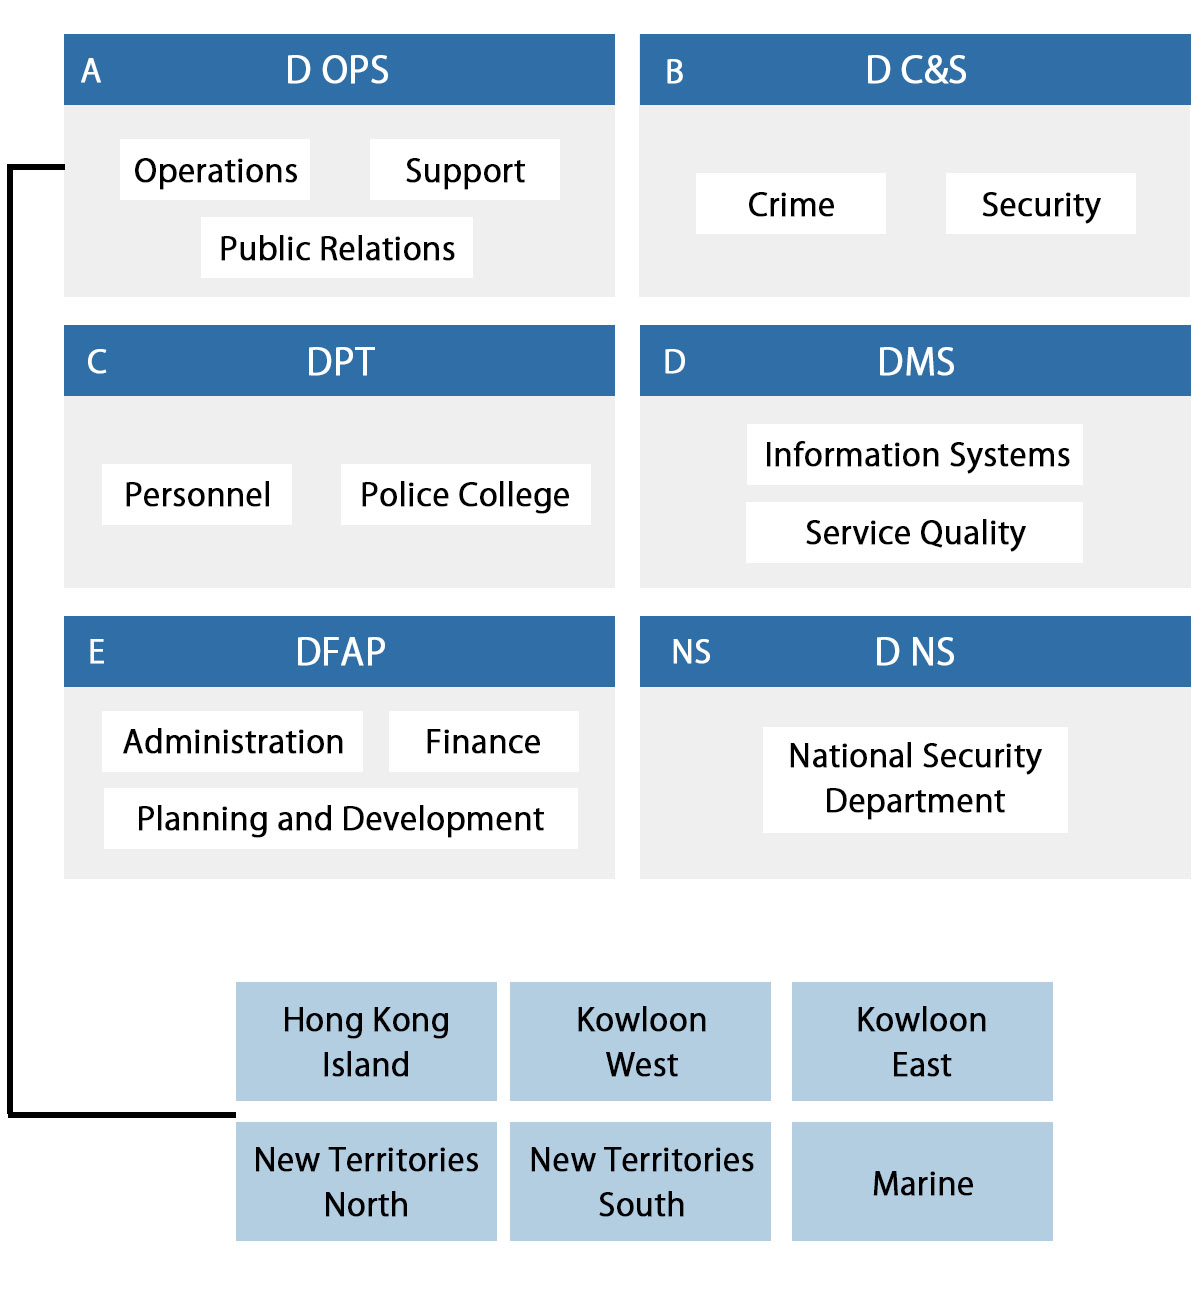 A Department – D OPS: Operations (including 6 Police regions: Hong Kong Island, Kowloon West, Kowloon East, New Territories North, New Territories South, Marine); Support. B Department - D C&S:  Crime;  Security. C Department - DPT: Personnel; Police College; D Department - DMS : Information Systems; Services Quality. E Department - DFAP: Administration, Finance, Planning and Development. D NS: National Security